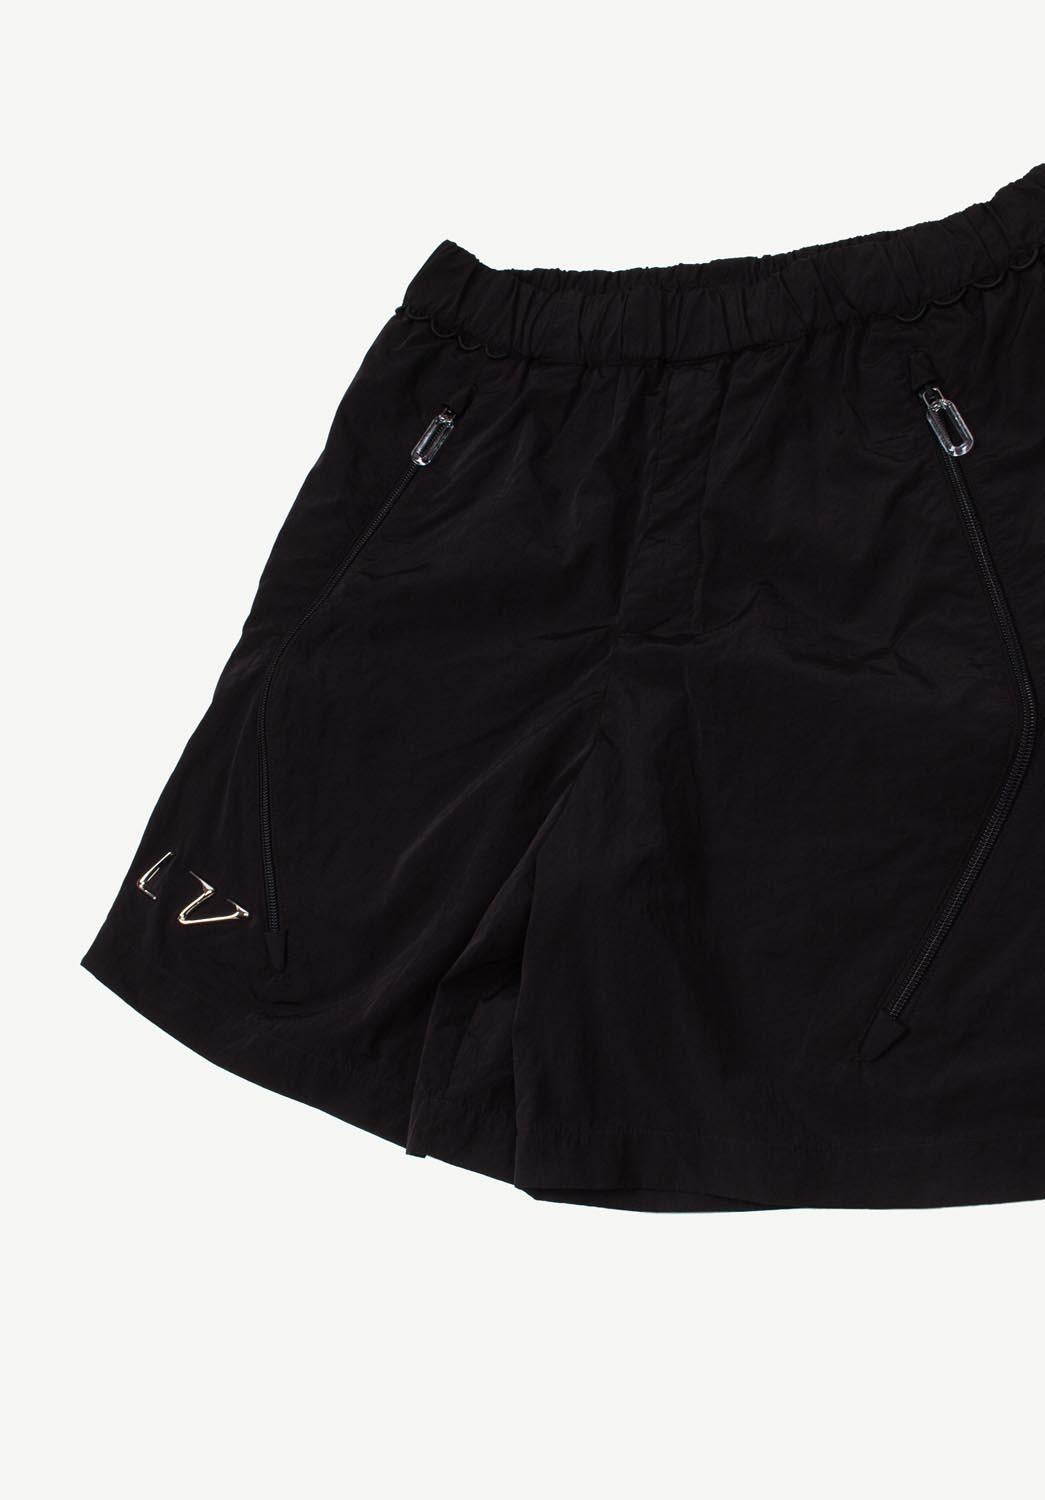 Louis Vuitton Mens Shorts, Black, XXL*Stock Confirmation Required